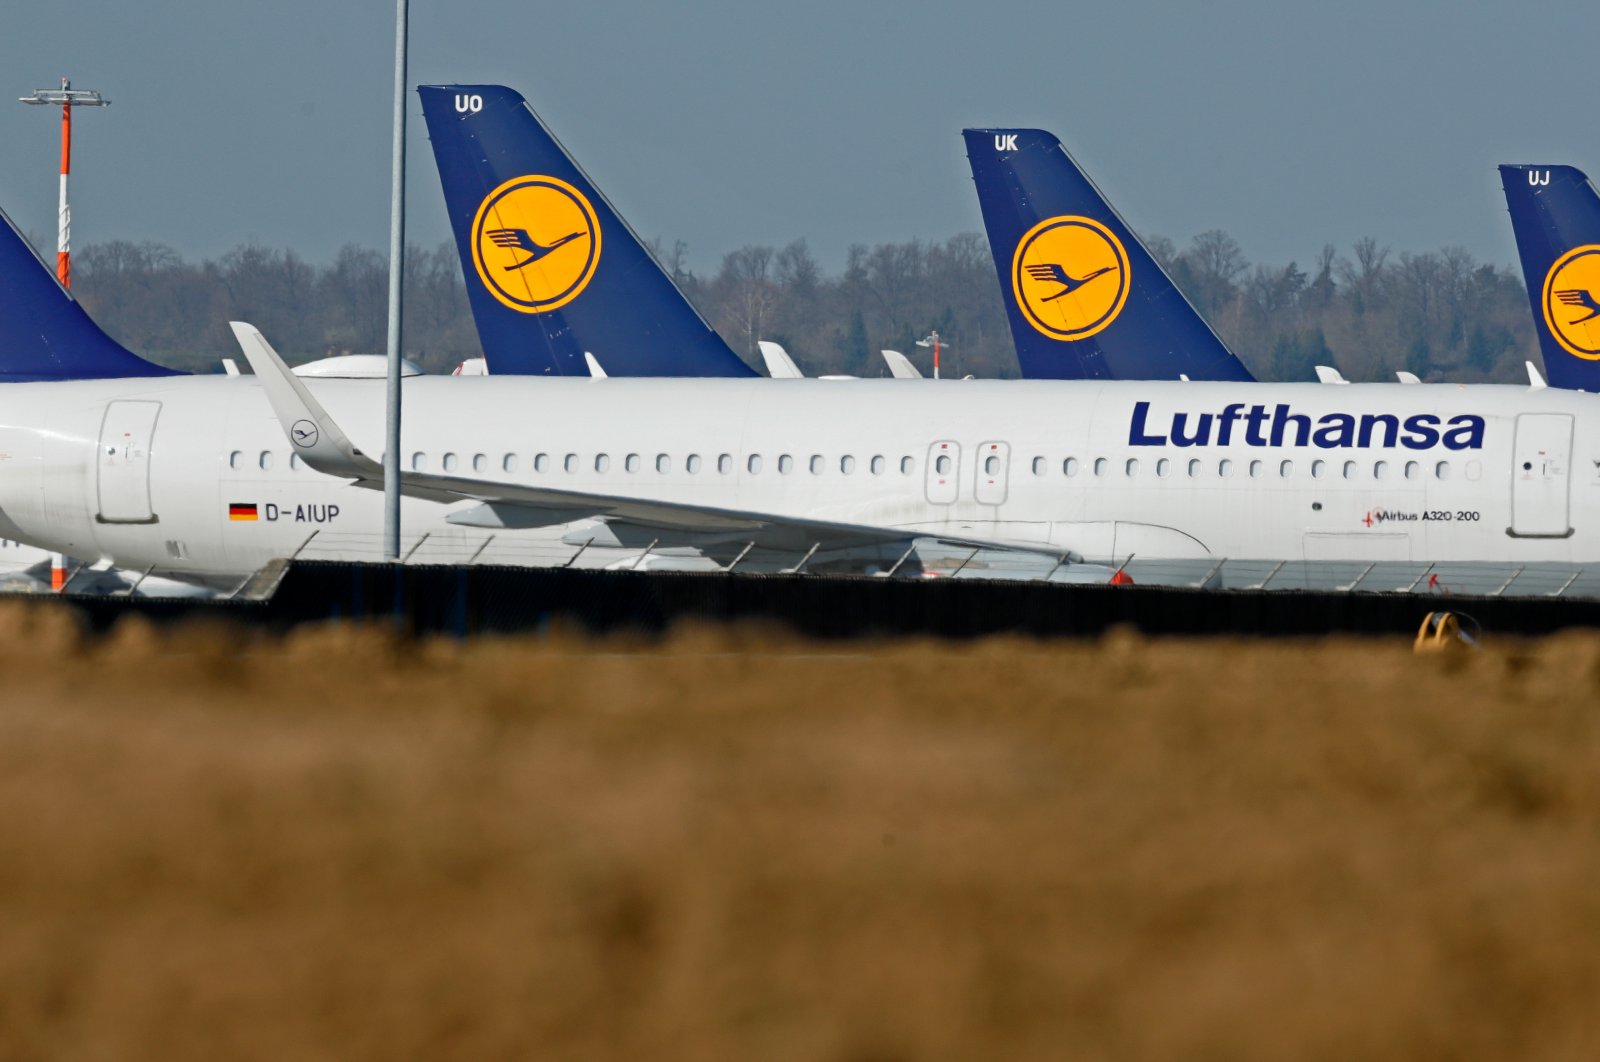 At the peak of lockdown measures, German aviation giant Lufthanser was posting loses of up to 1 million euros per hour, April 29, 2020 (IHA Photo)